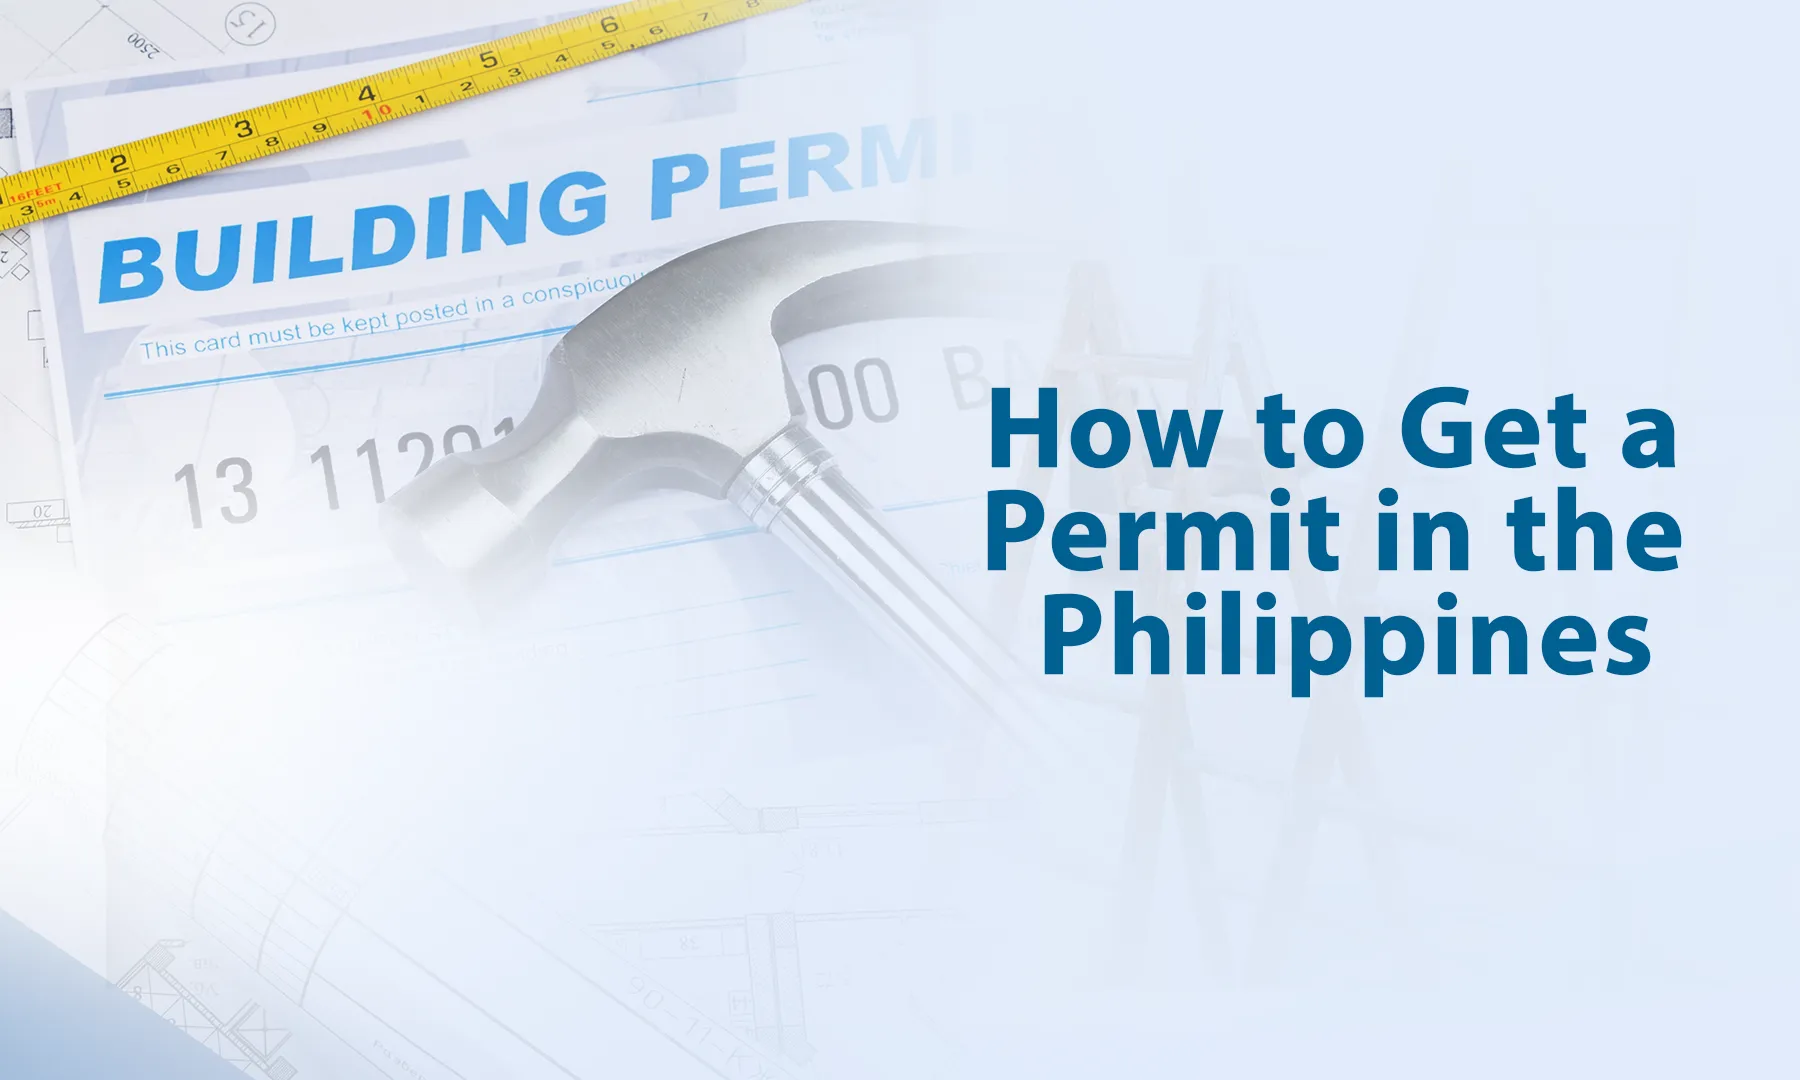 How to Get a Building Permit in the Philippines